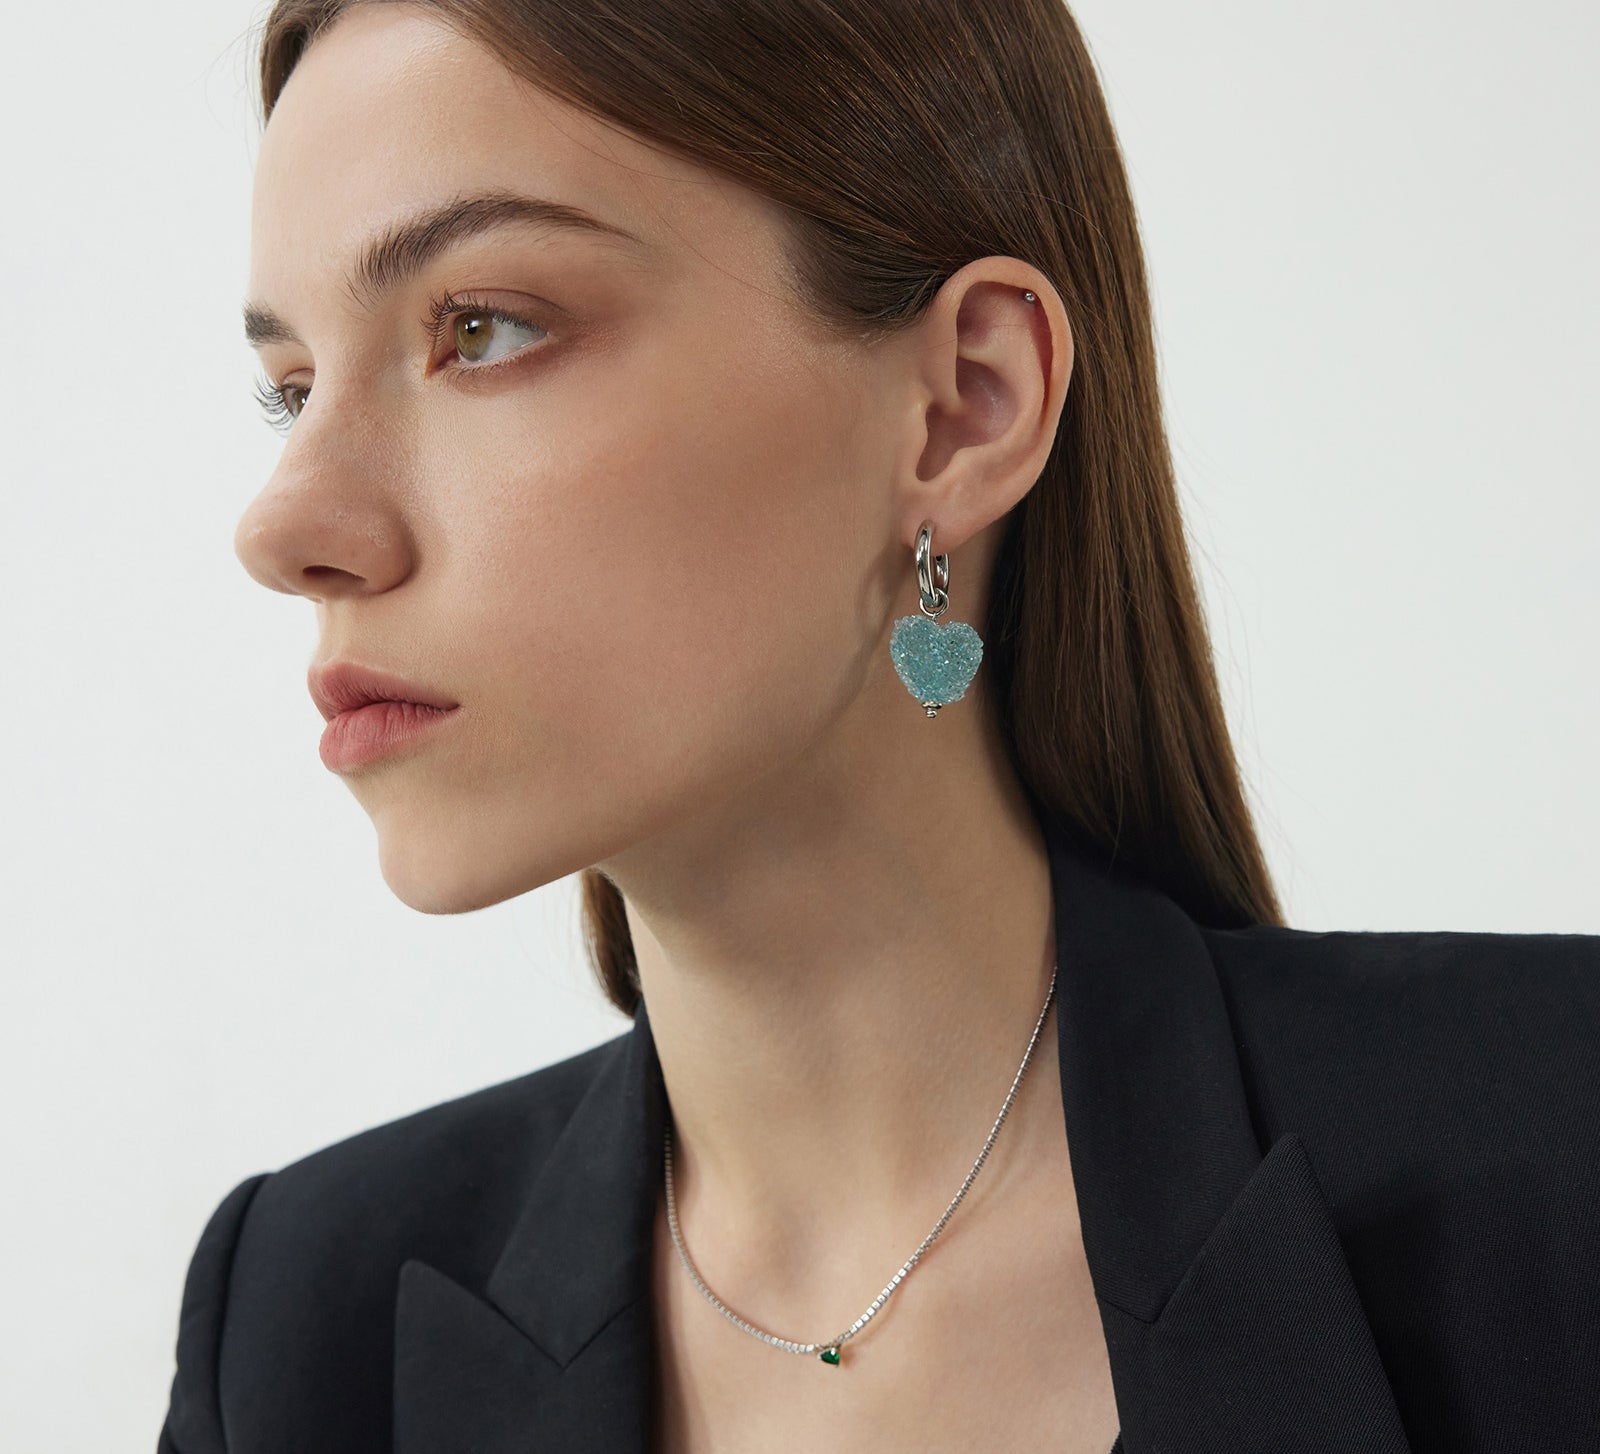 Heart Hoop Earrings in Blue Horizon, radiating with a horizon-inspired glow, these hoops add a touch of serenity with heart shapes in a calming blue hue